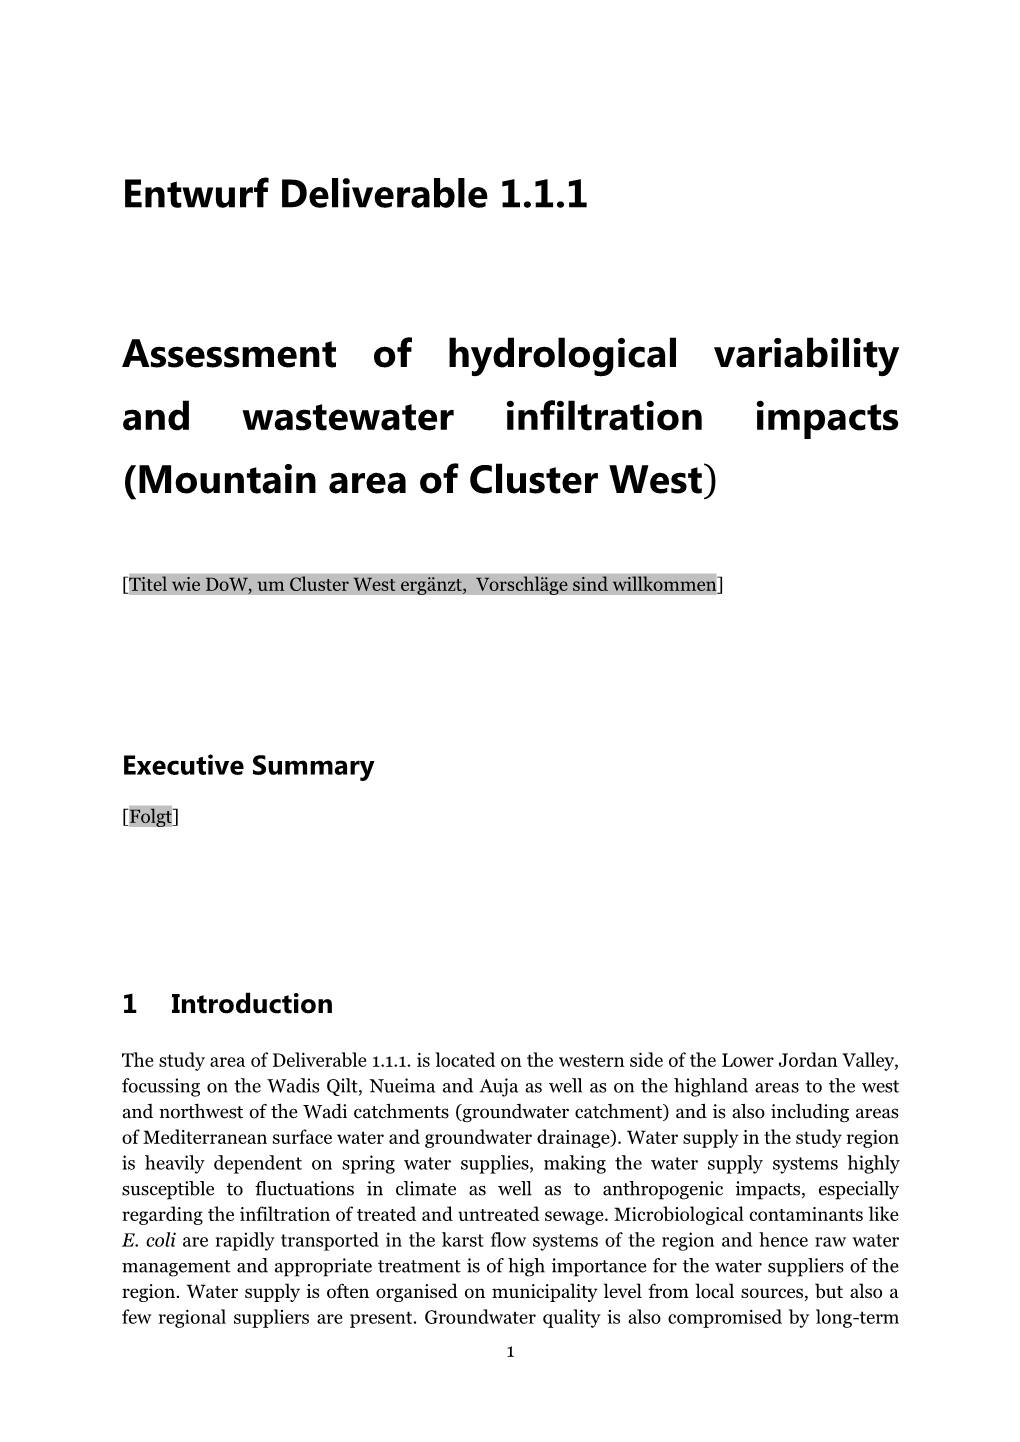 Entwurf Deliverable 1.1.1 Assessment of Hydrological Variability and Wastewater Infiltration Impacts (Mountain Area of Cluster W